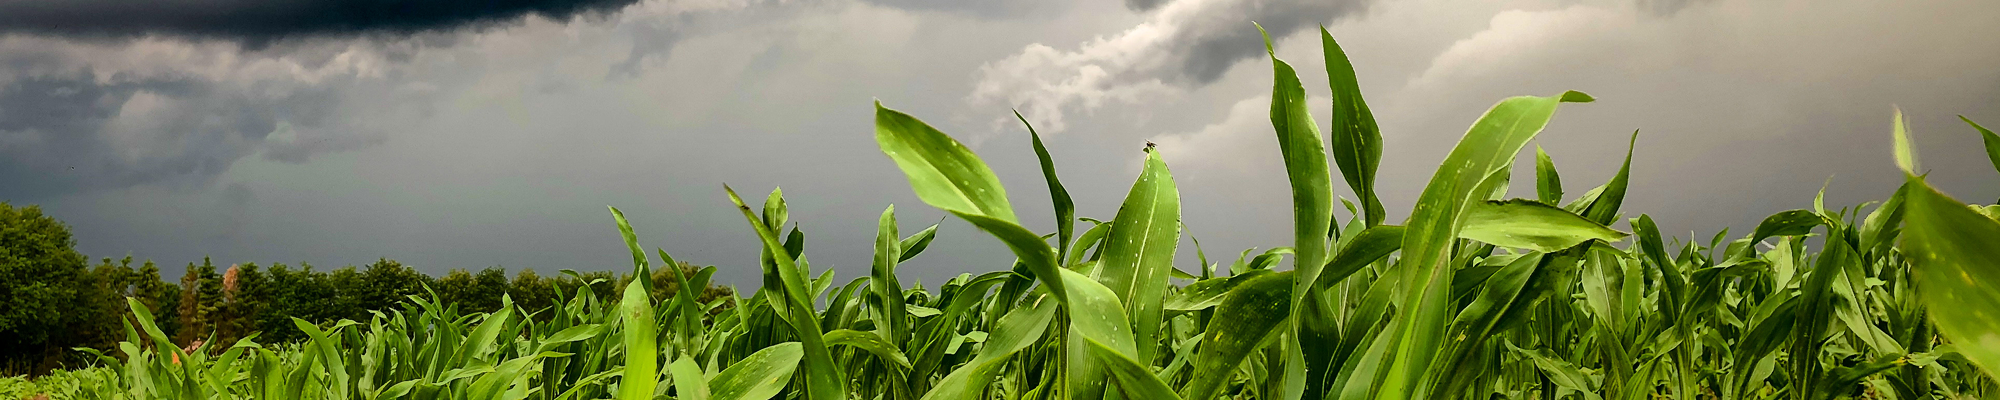 Corn field with storm clouds